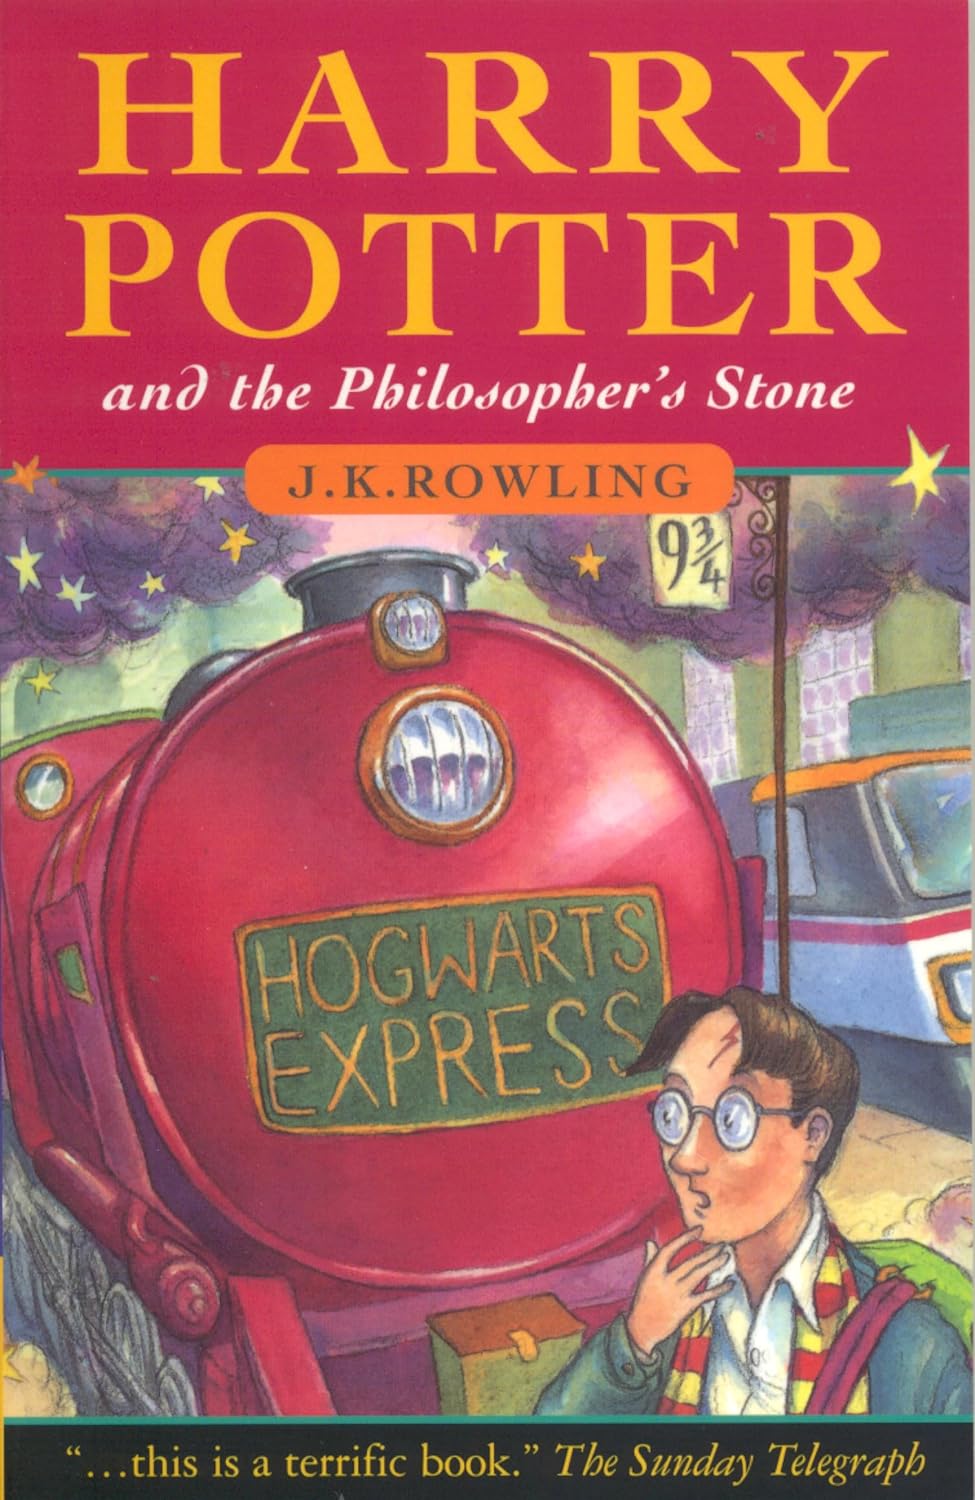 Harry Potter and the Sorcerer’s Stone by J.K. Rowling (1997)